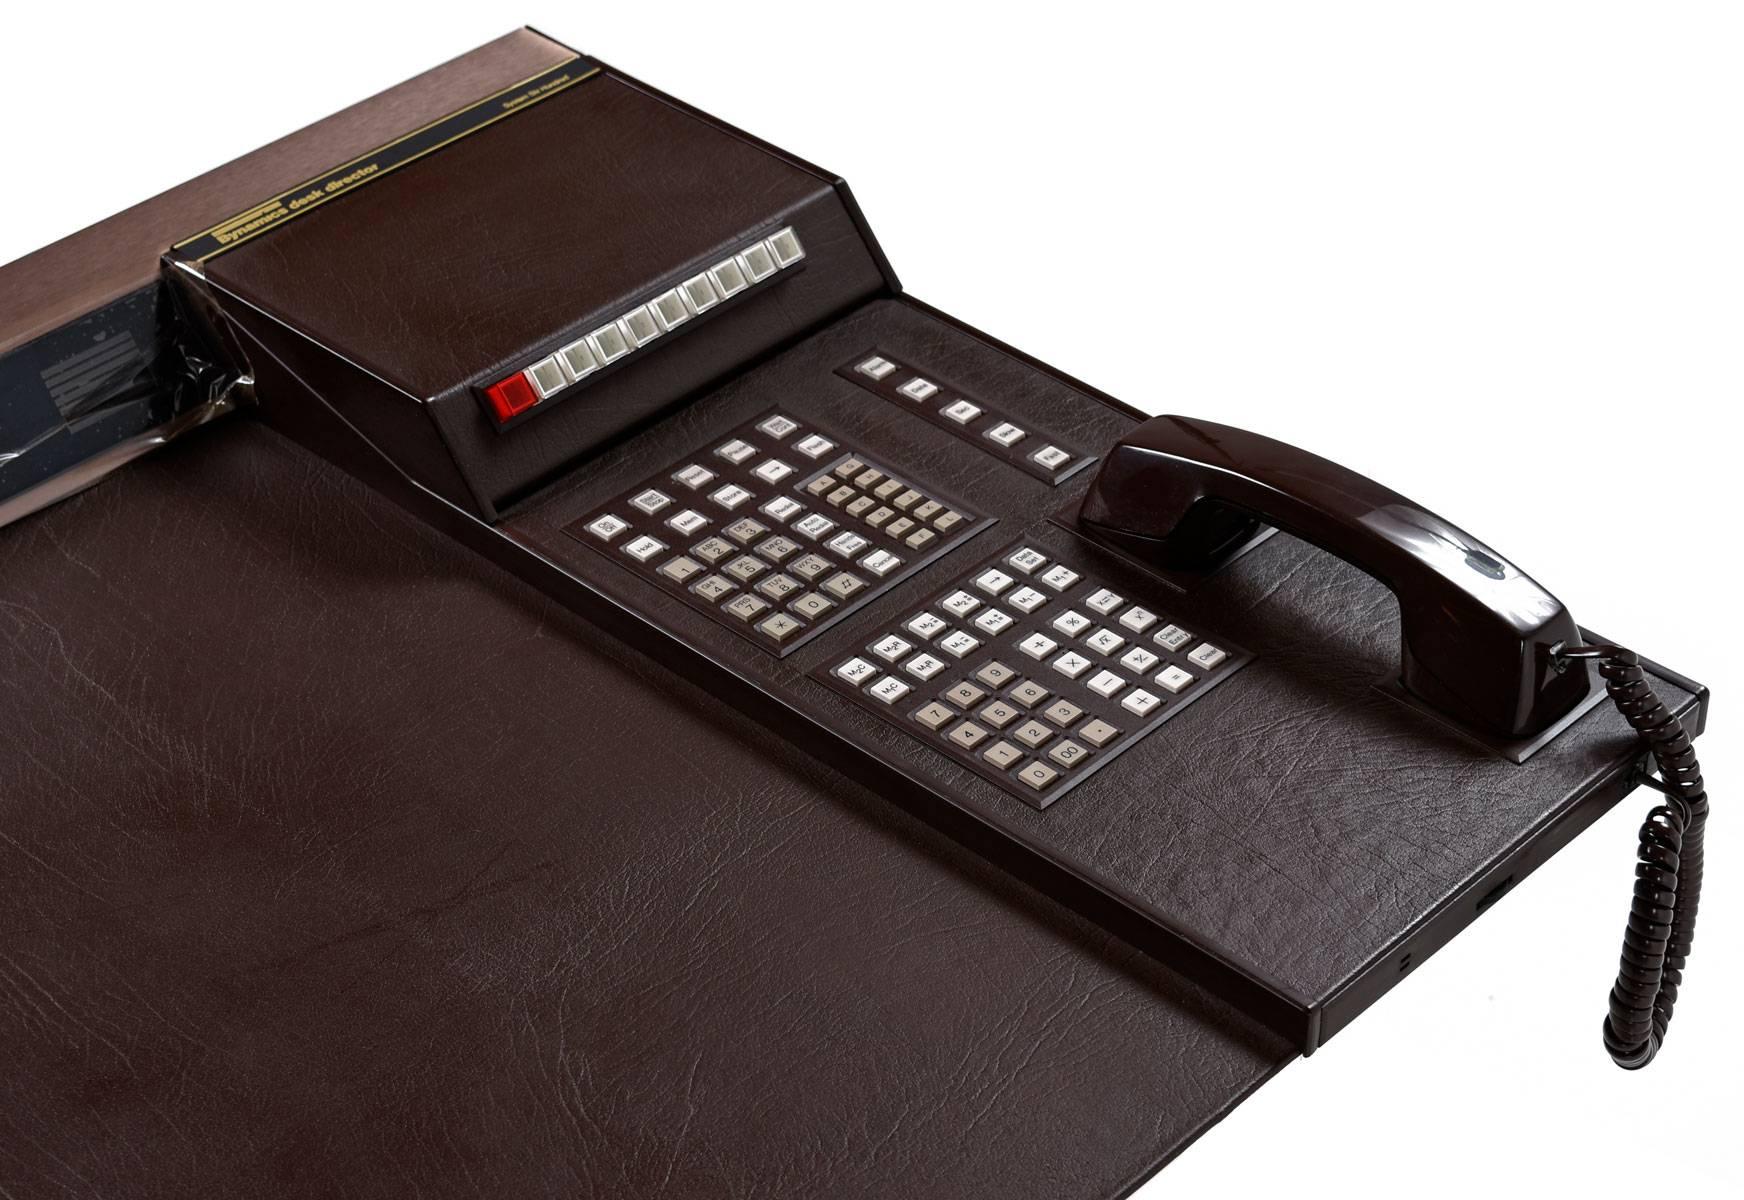 No status seeking, 1980s Wall Street executive should be without this leather bound desk apprentice. More than just a novelty item, this is a rare piece of tech and design history. If you can't afford a DeLorean, this desk director is the next best